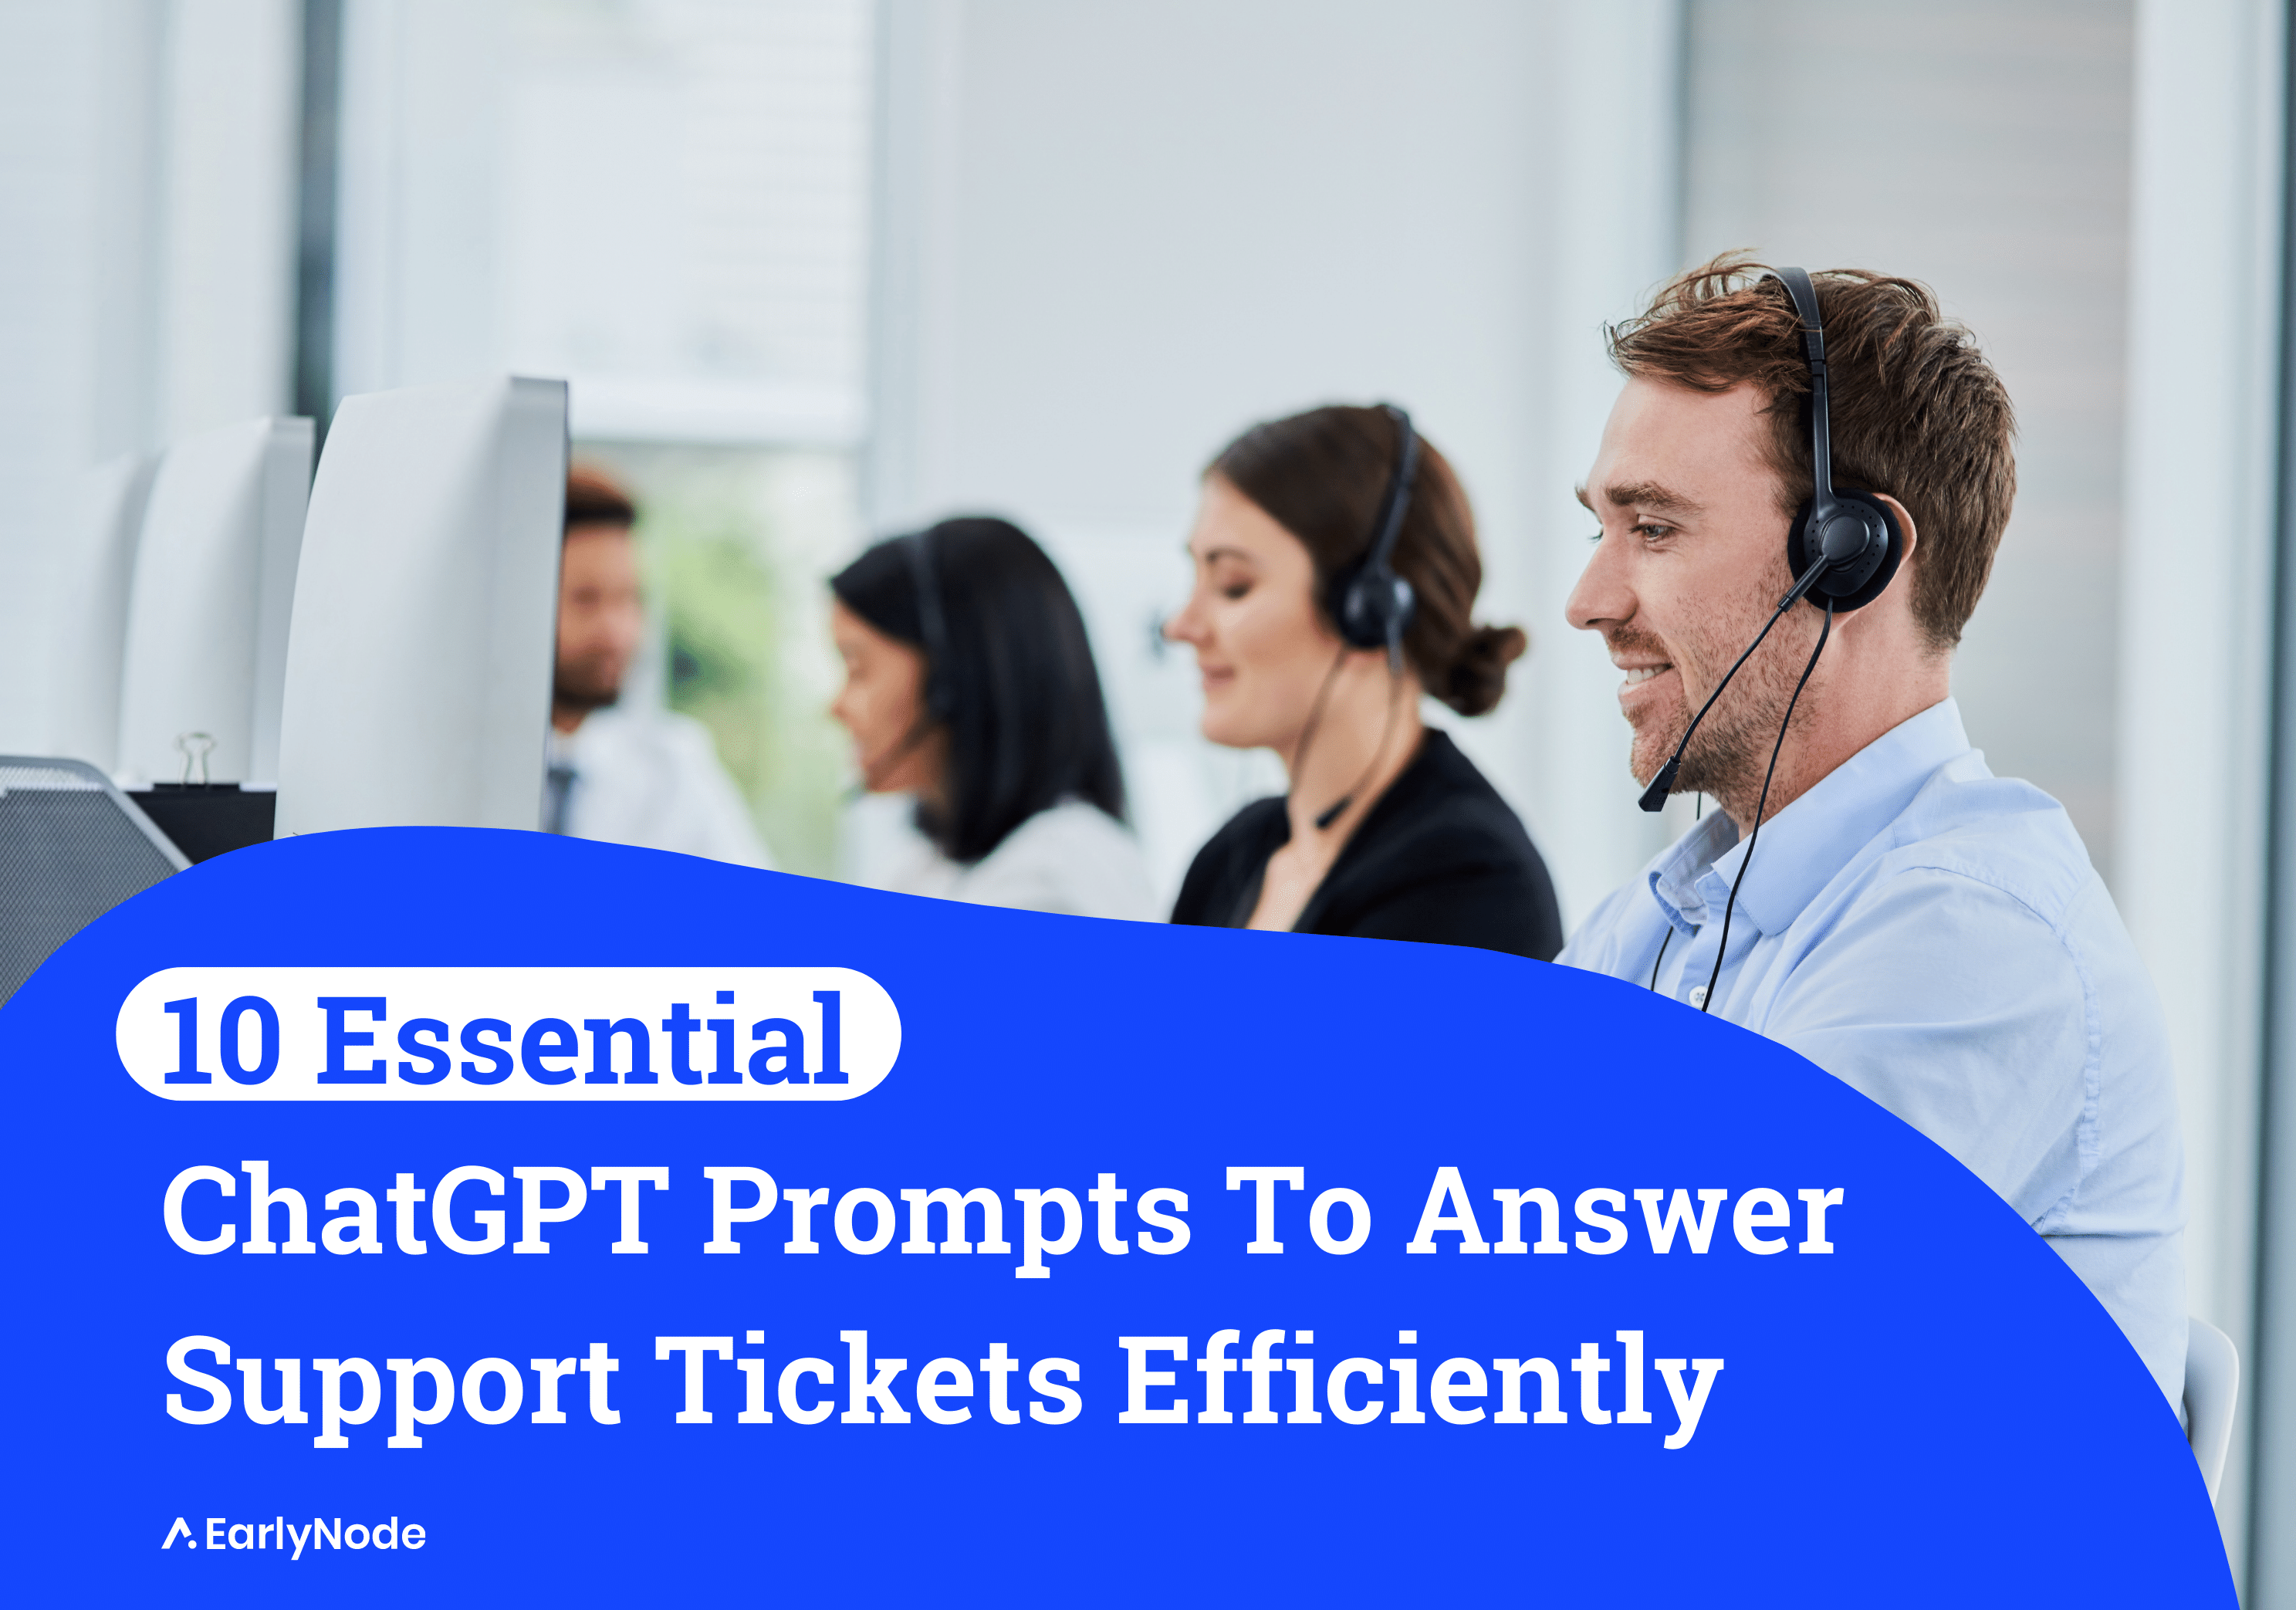 10 ChatGPT Prompts To Answer Support Tickets Efficiently & Effectively